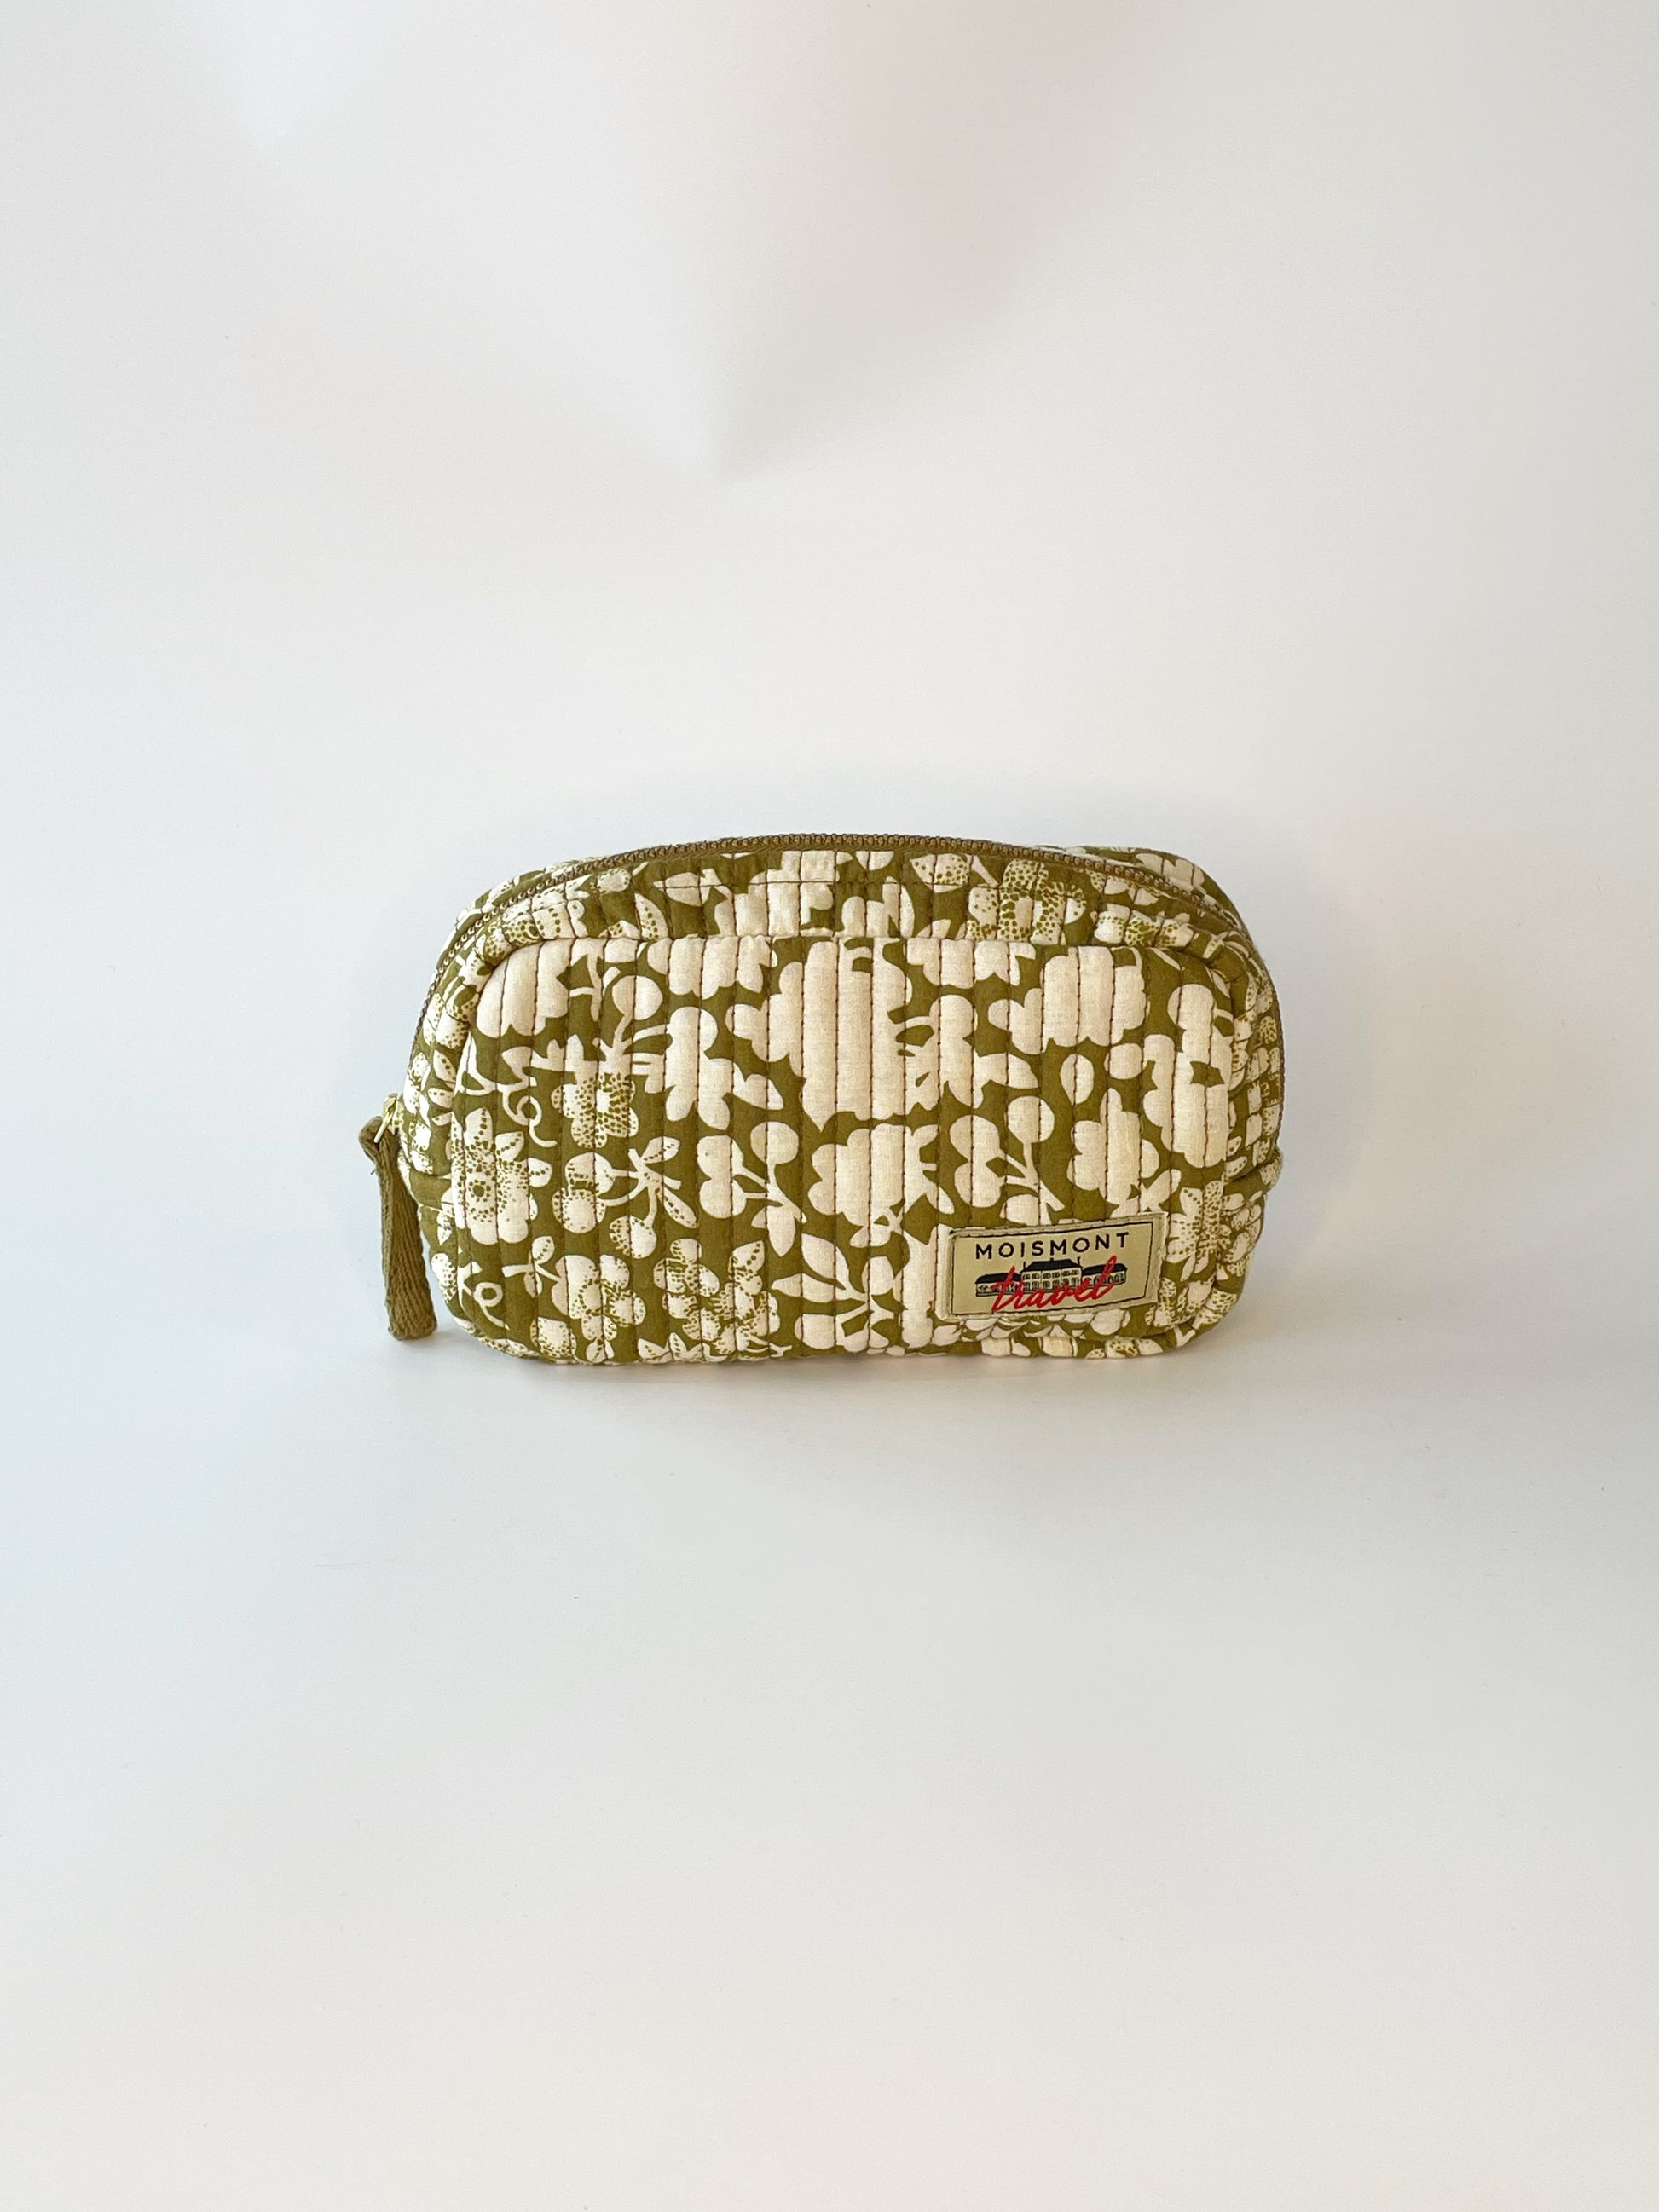 Moismont small cosmetic bag in sage